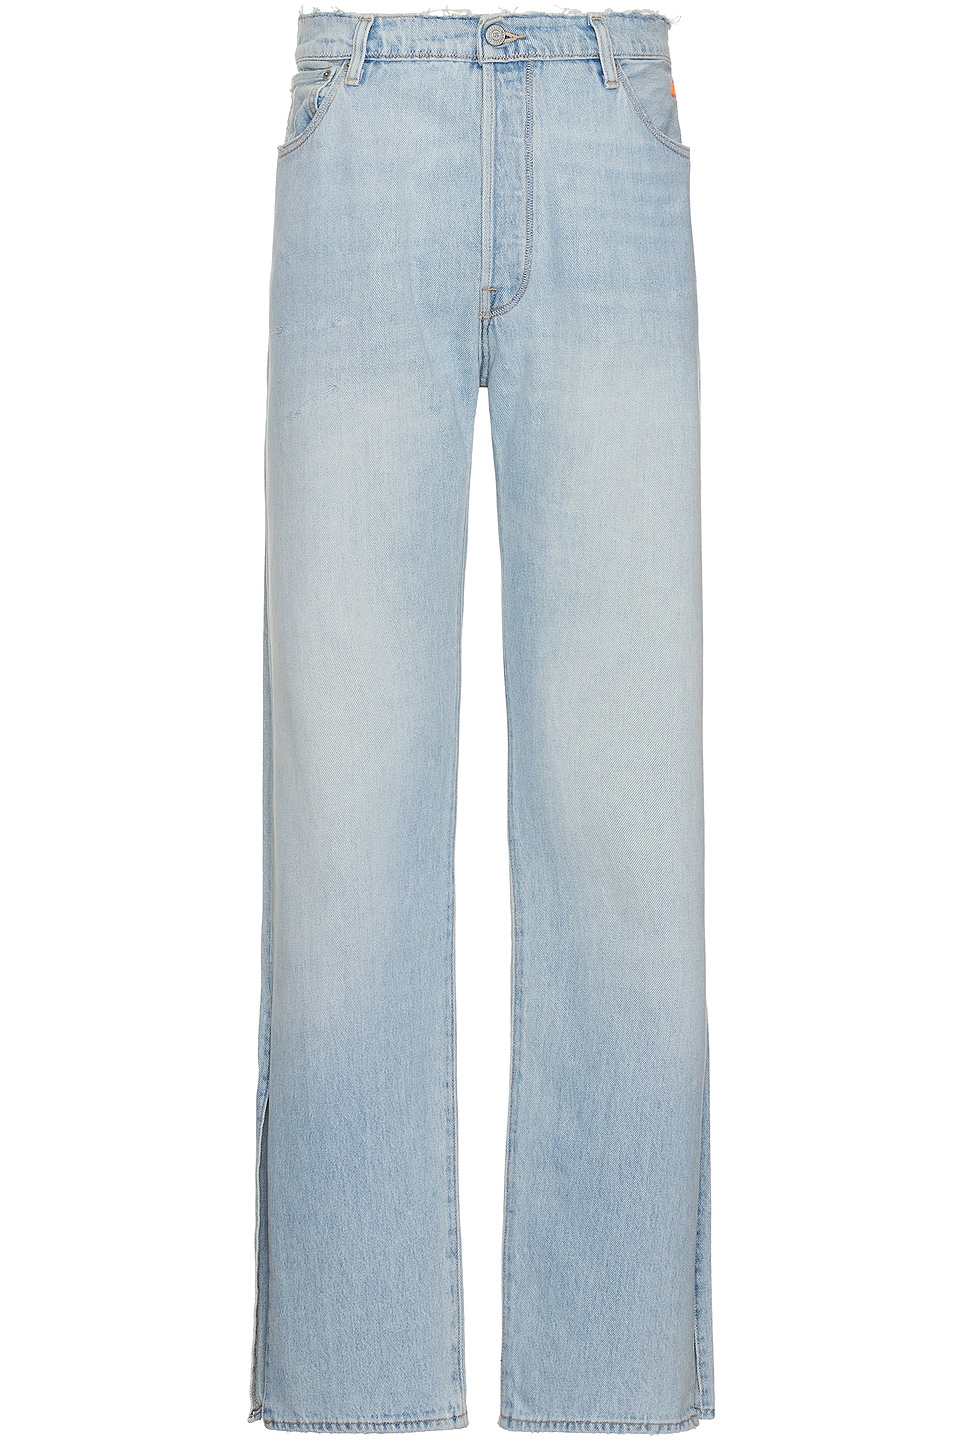 Image 1 of ERL Unisex Levis 501 Denim Woven in Blue